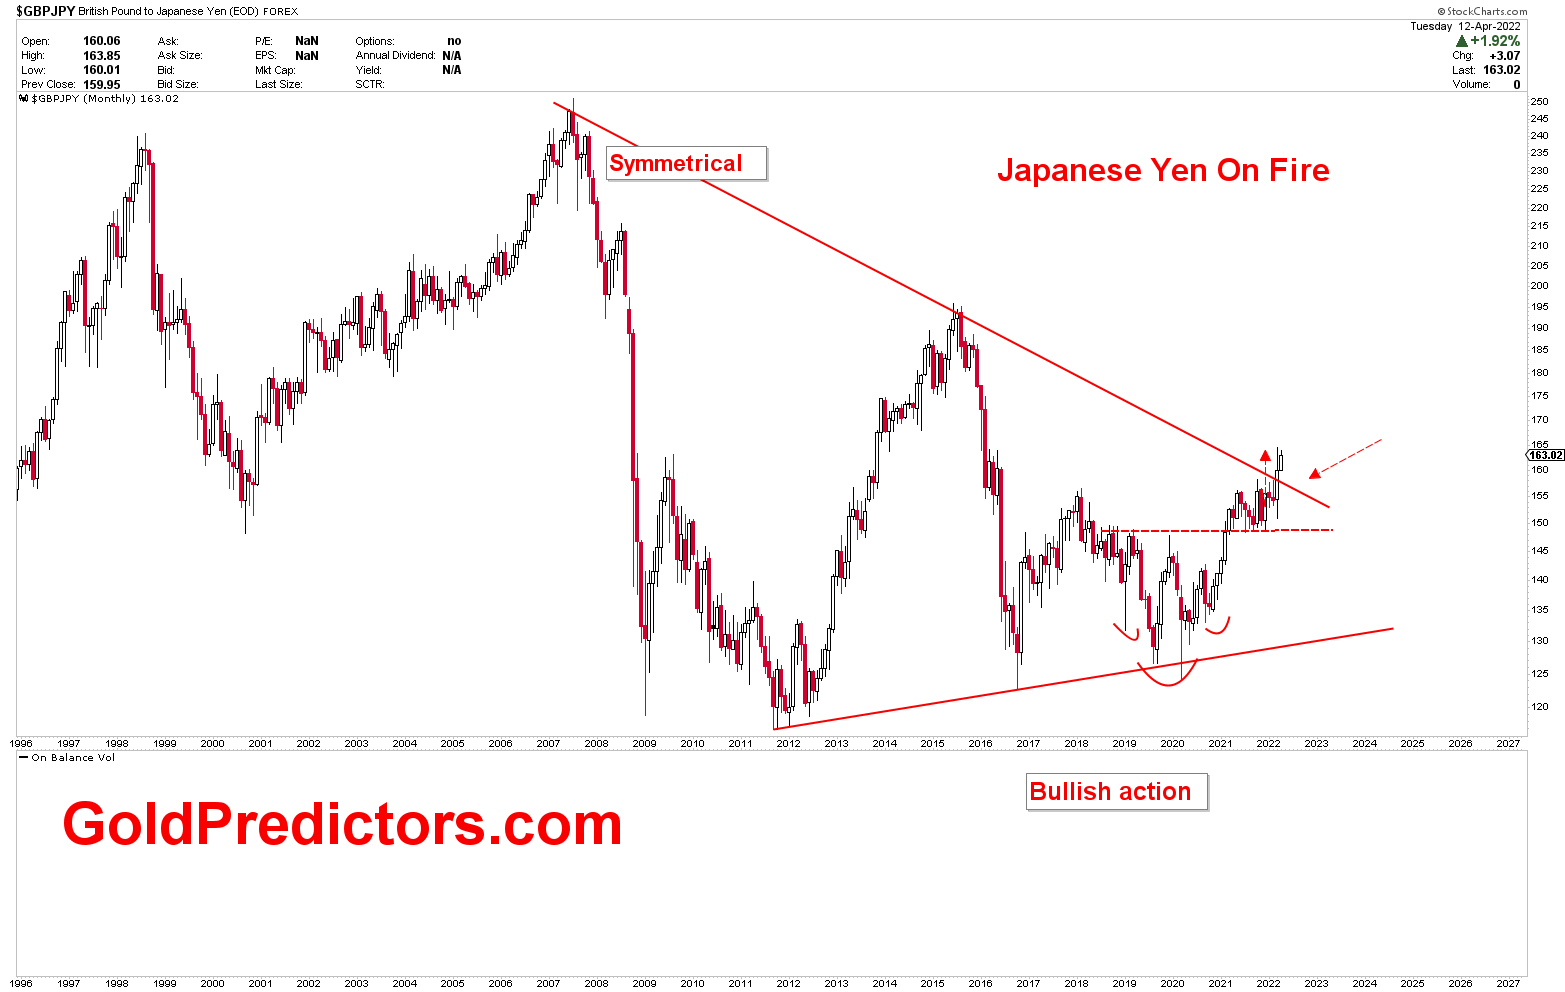 boom in gbpjpy